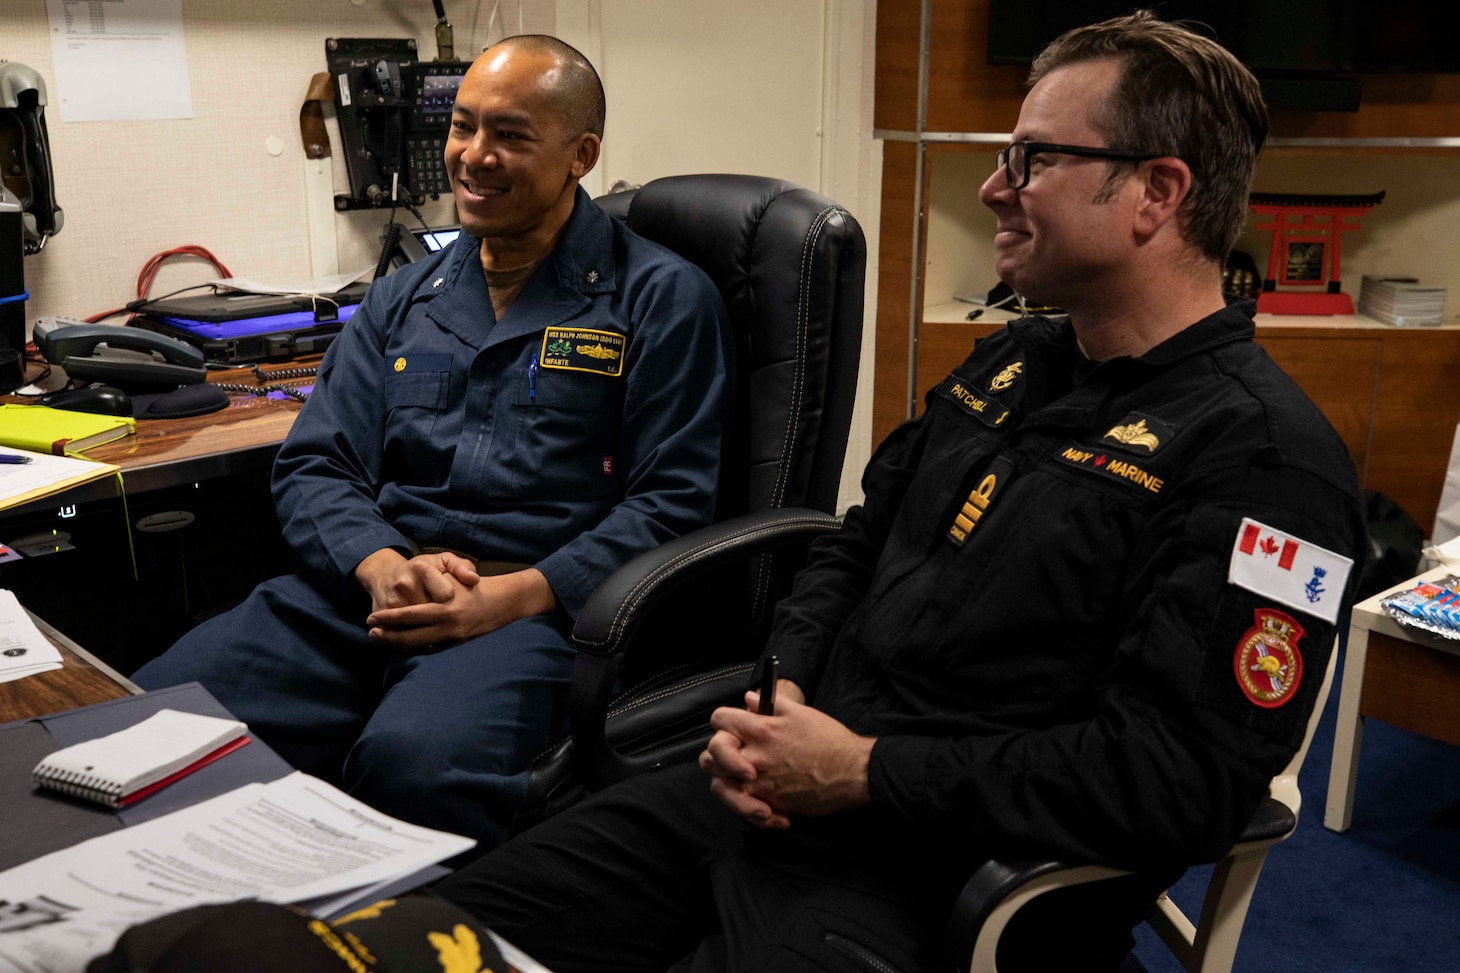 Cmdr. Isaia Infante, left, commanding officer of Arleigh Burke-class guided-missile destroyer USS Ralph Johnson (DDG 114) and Cmdr. Sam Patchell, right, commanding officer of His Majesty’s Canadian Ship (HMCS) Ottawa (FFH 341) conduct a meeting during a visit to Ralph Johnson Sep. 6 in the South China Sea. Ralph Johnson is assigned to Commander, Task Force 71/Destroyer Squadron (DESRON) 15, the Navy’s largest forward-deployed DESRON and the U.S. 7th Fleet’s principal surface force.